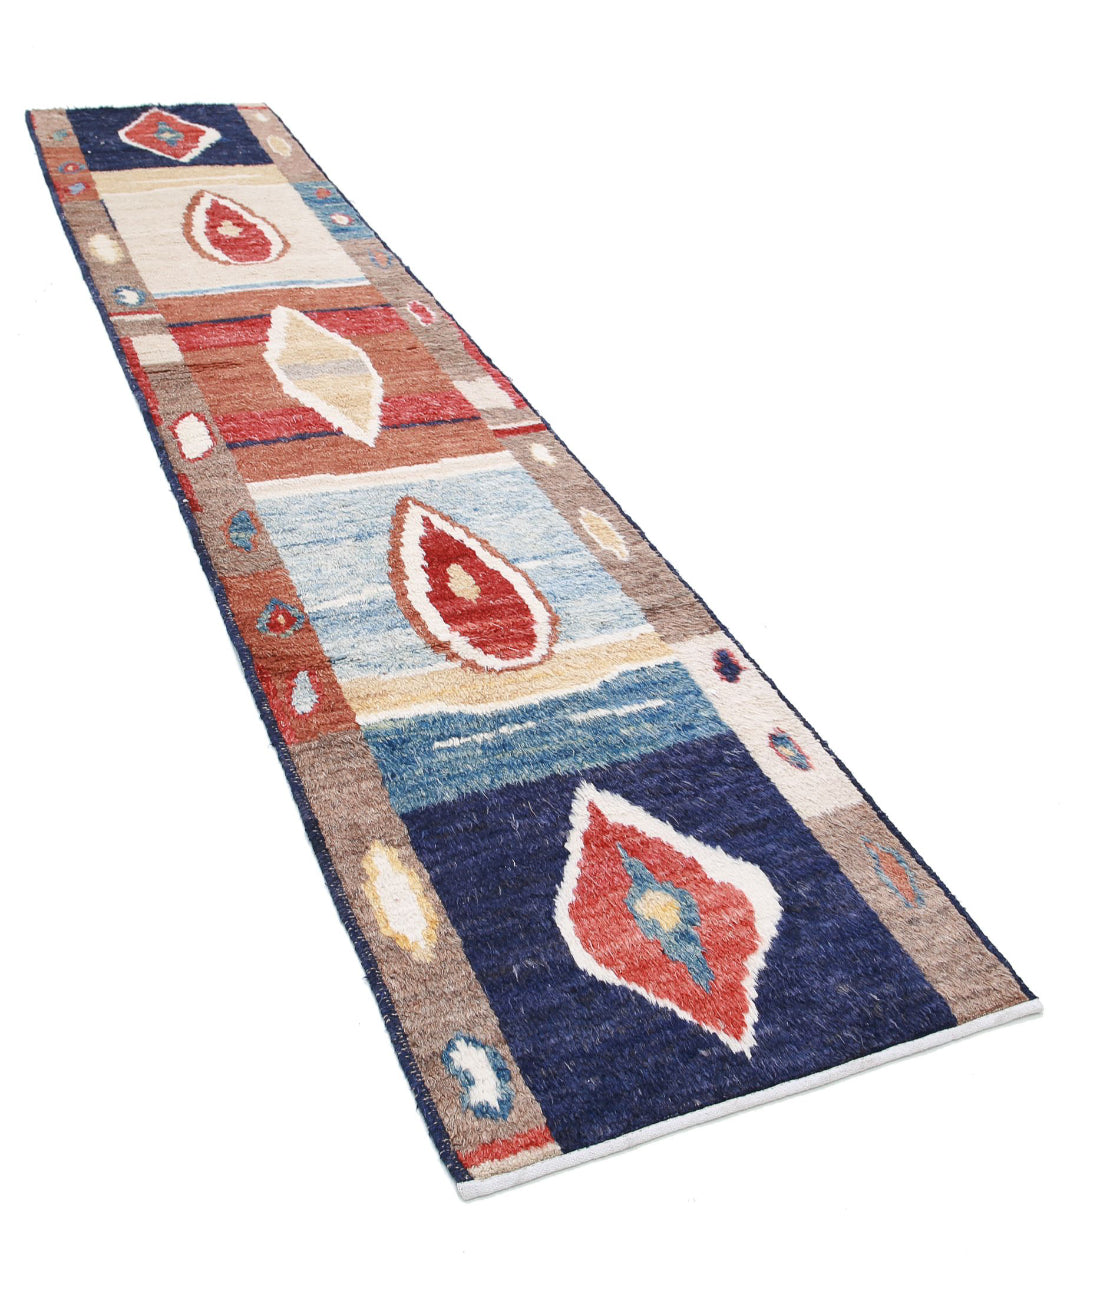 Hand Knotted Tribal Moroccan Wool Rug - 2'9'' x 13'10'' 2'9'' x 13'10'' (83 X 415) / Blue / Red